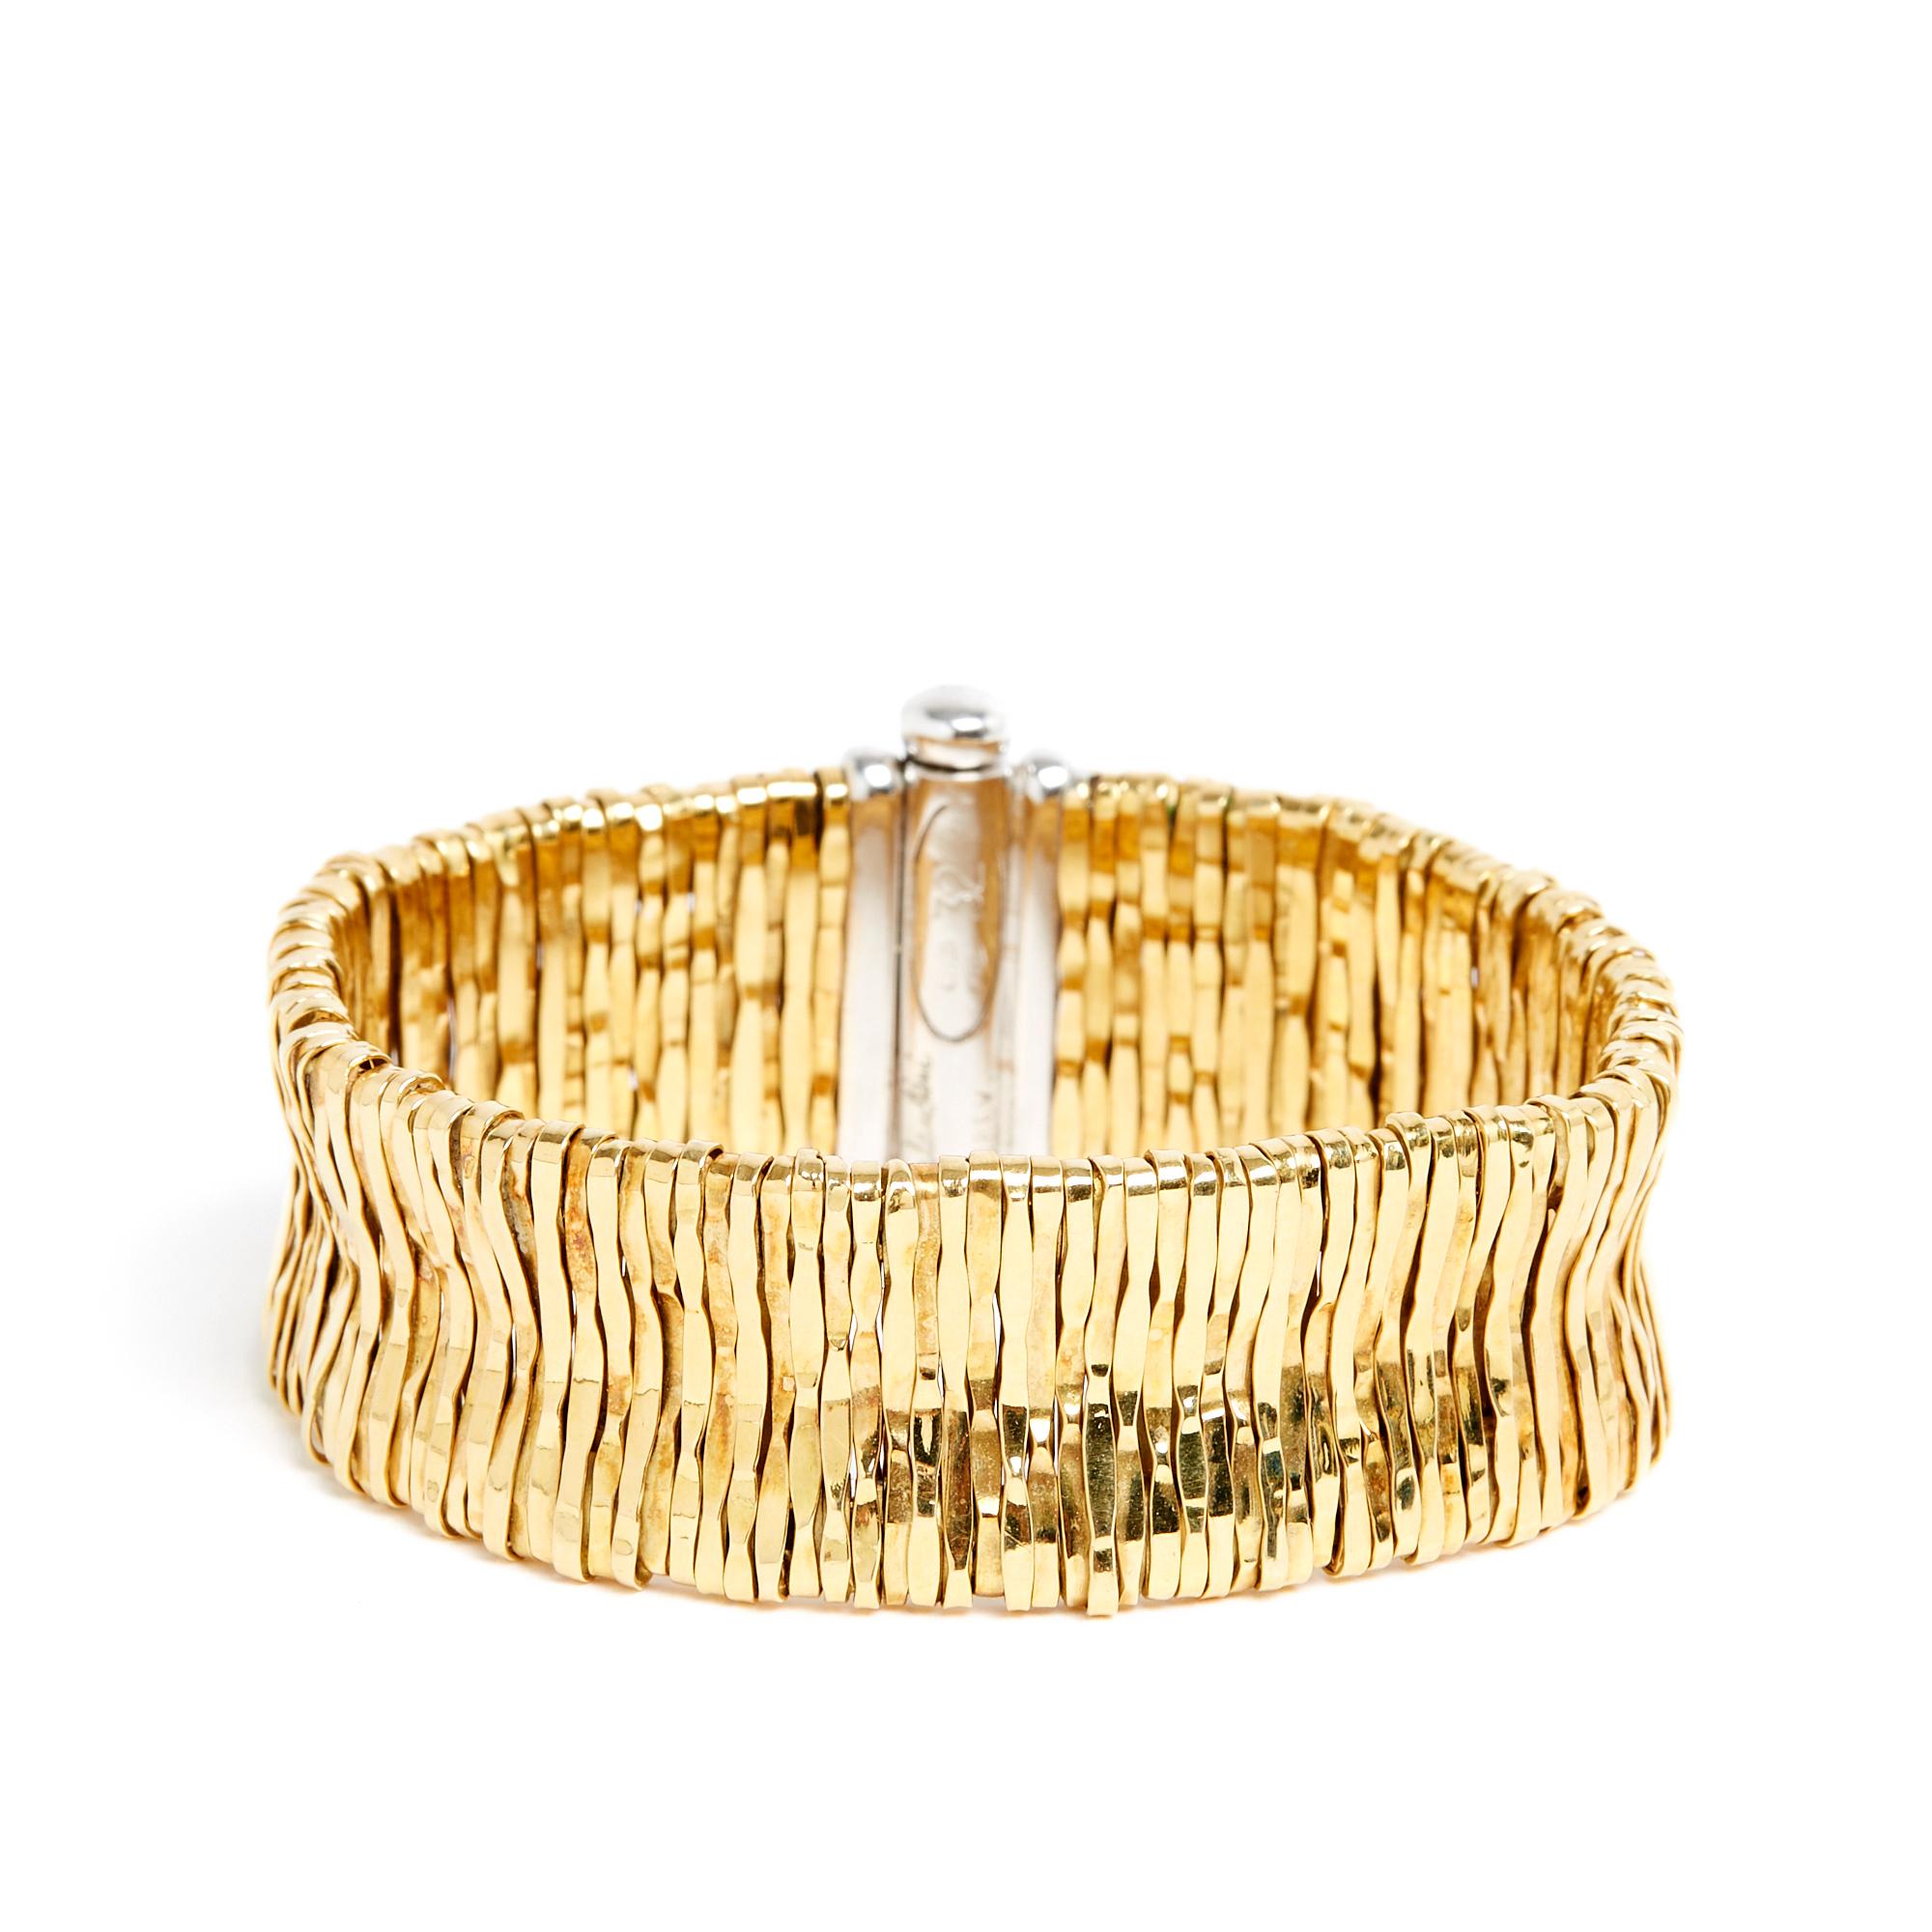 Orlandini bracelet (Orlando Orlandini) flexible yellow gold mesh style cuff with white gold clasp inlaid with small brilliant-cut diamonds, numbered 32, signed. Total length 18 cm, width 2 cm, weight 75.76 gr. The bracelet is in very good condition